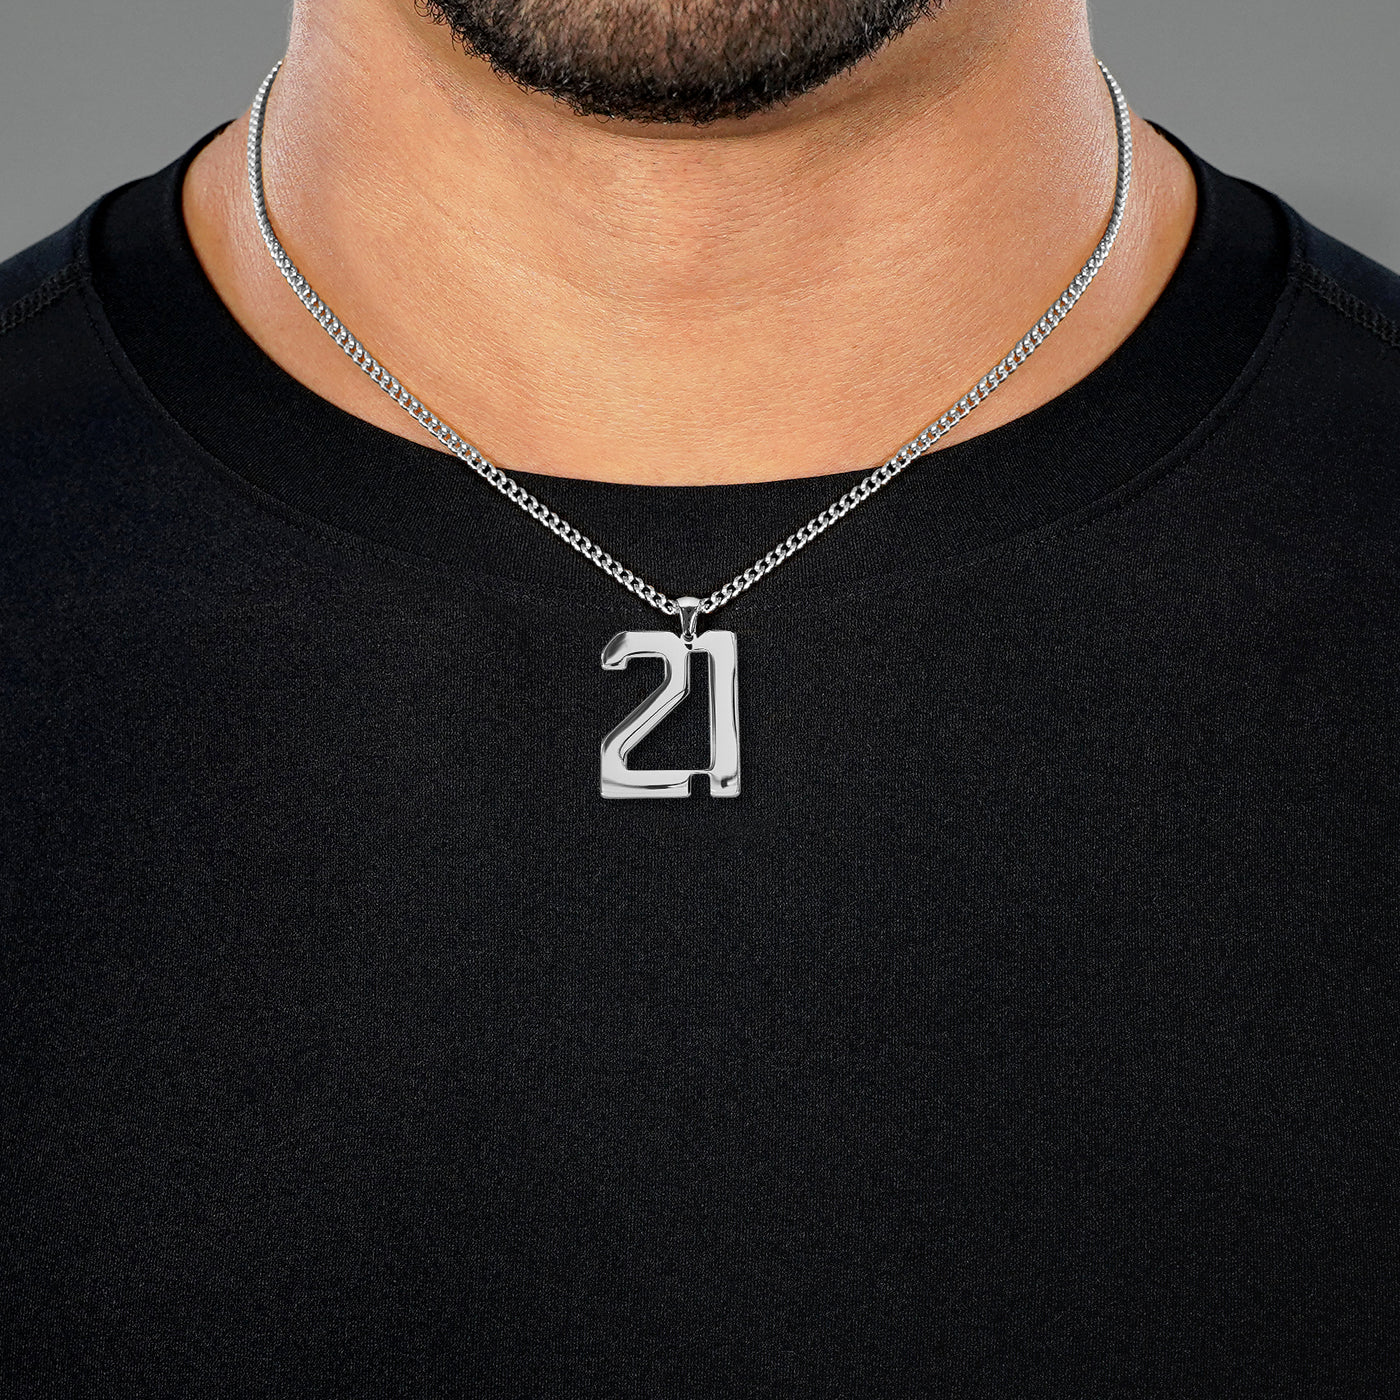 21 Number Pendant with Chain Necklace - Stainless Steel